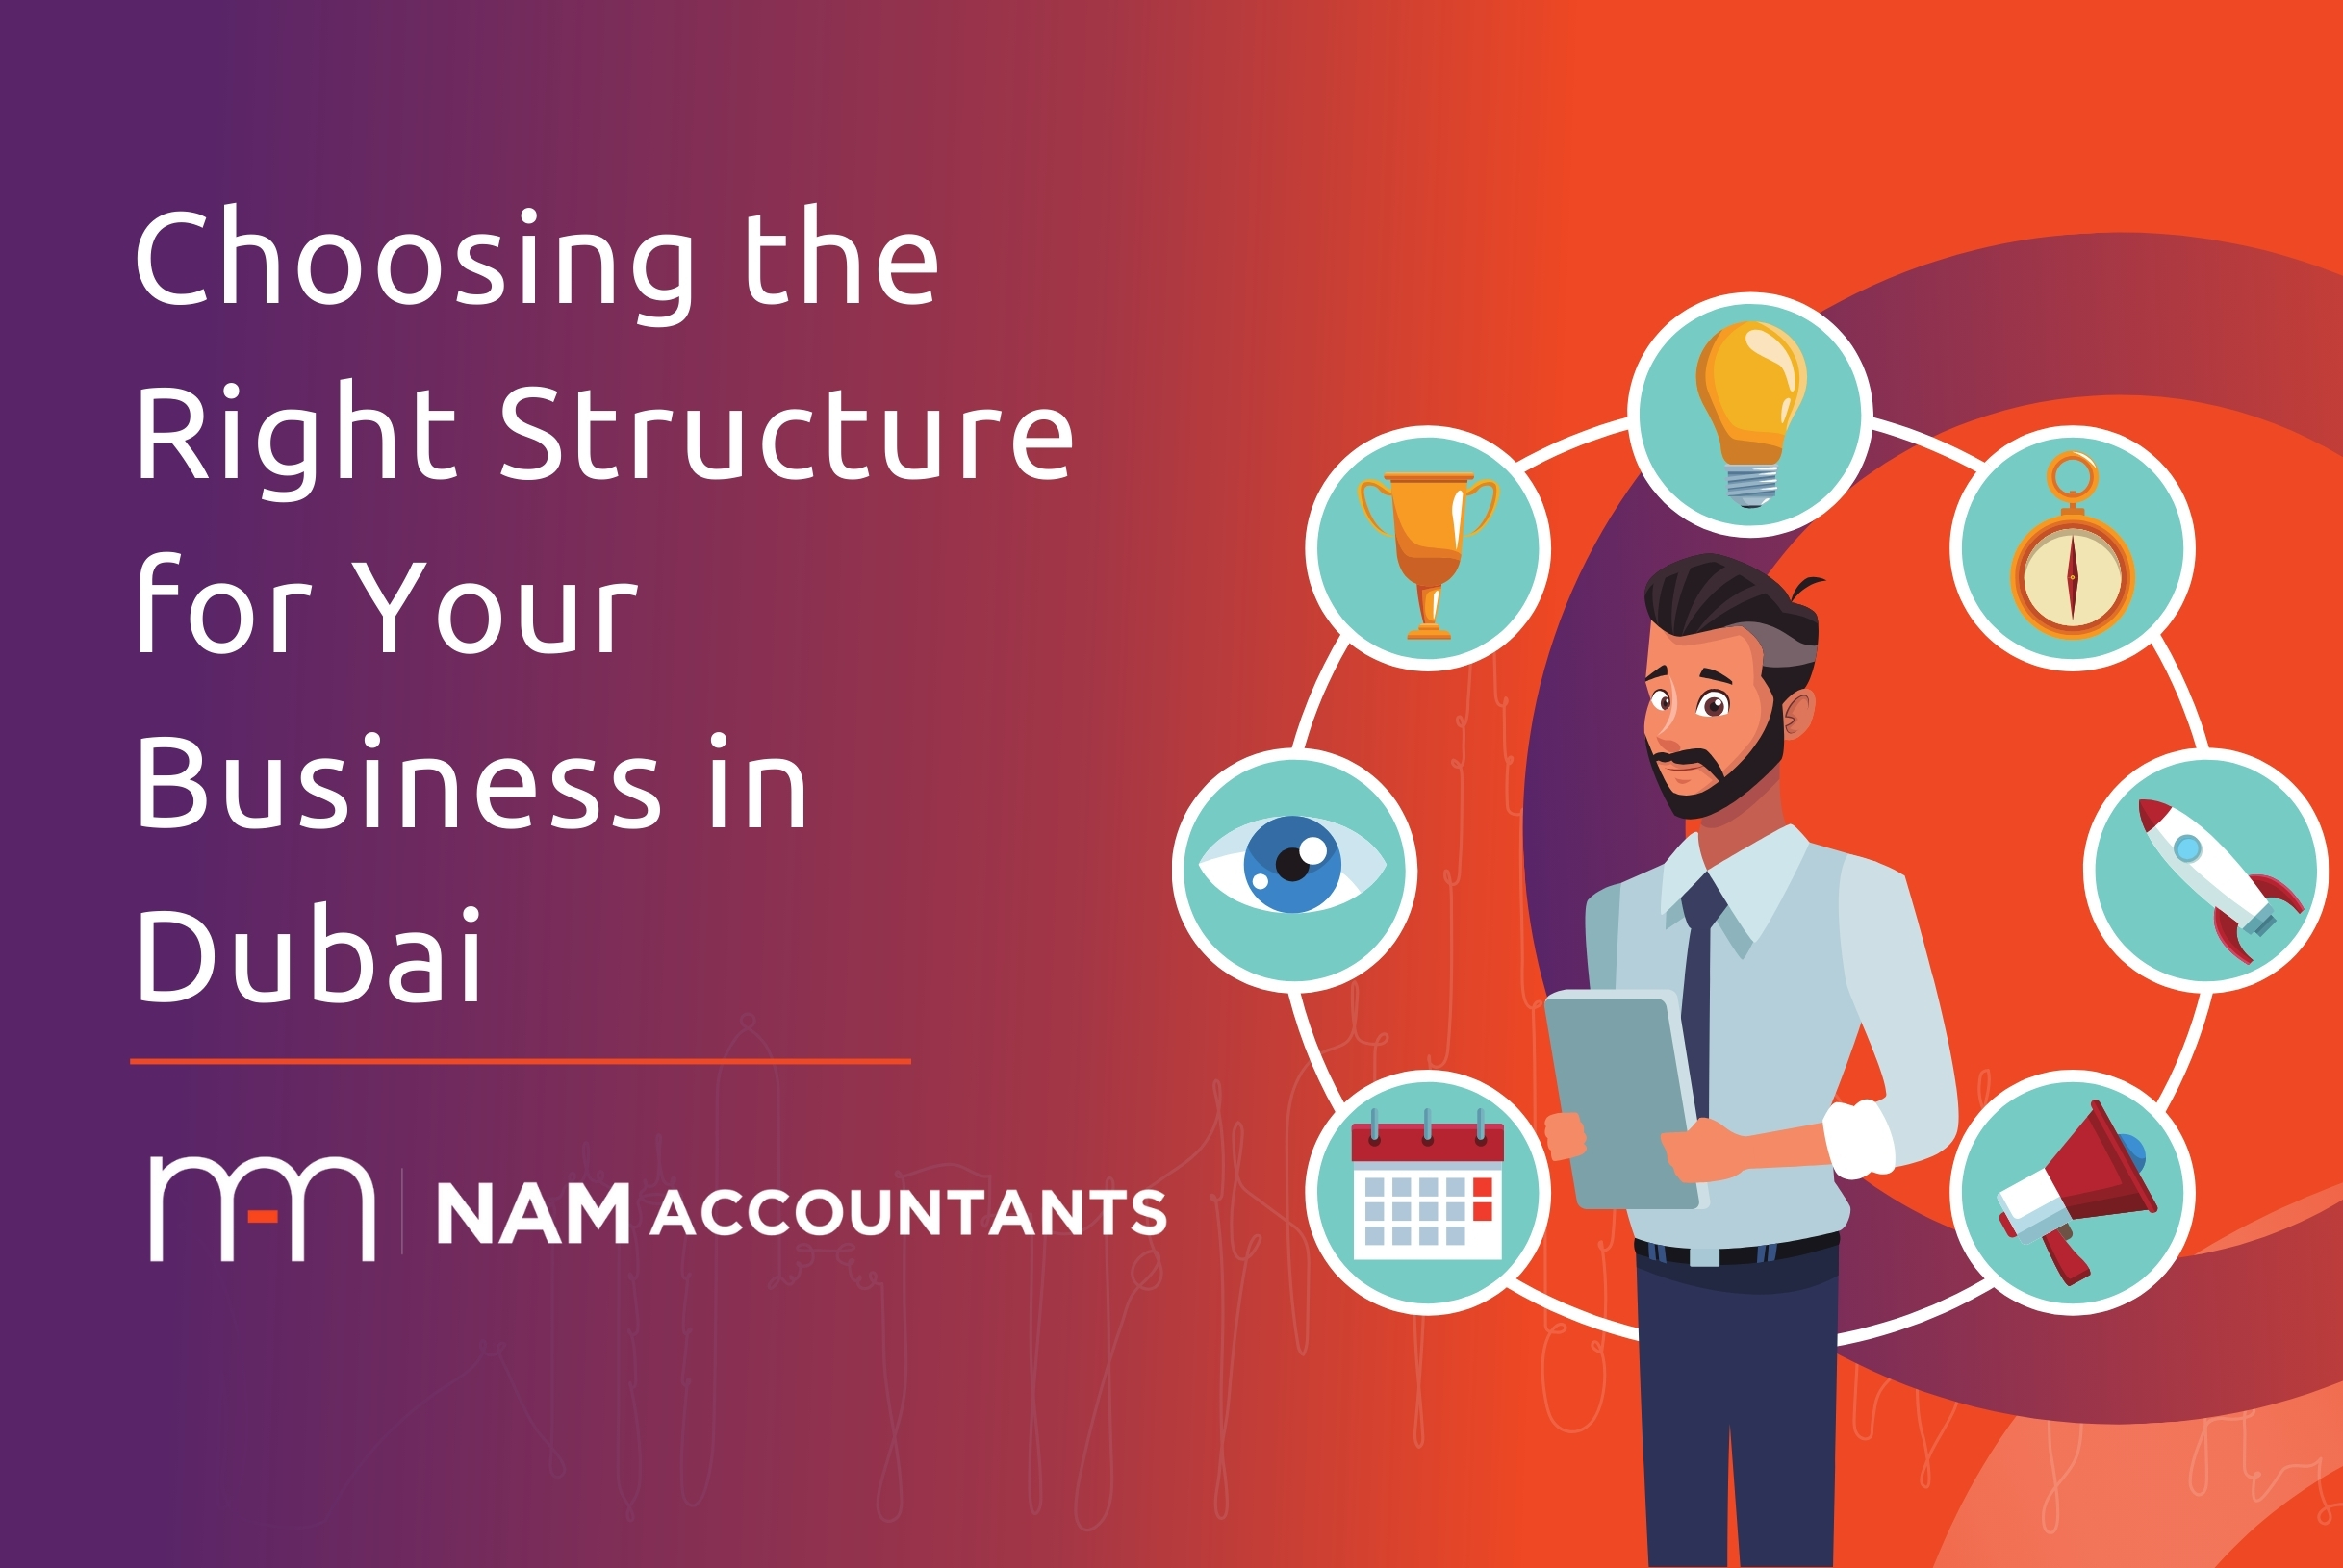 Choosing the Right Structure for Your Business in Dubai